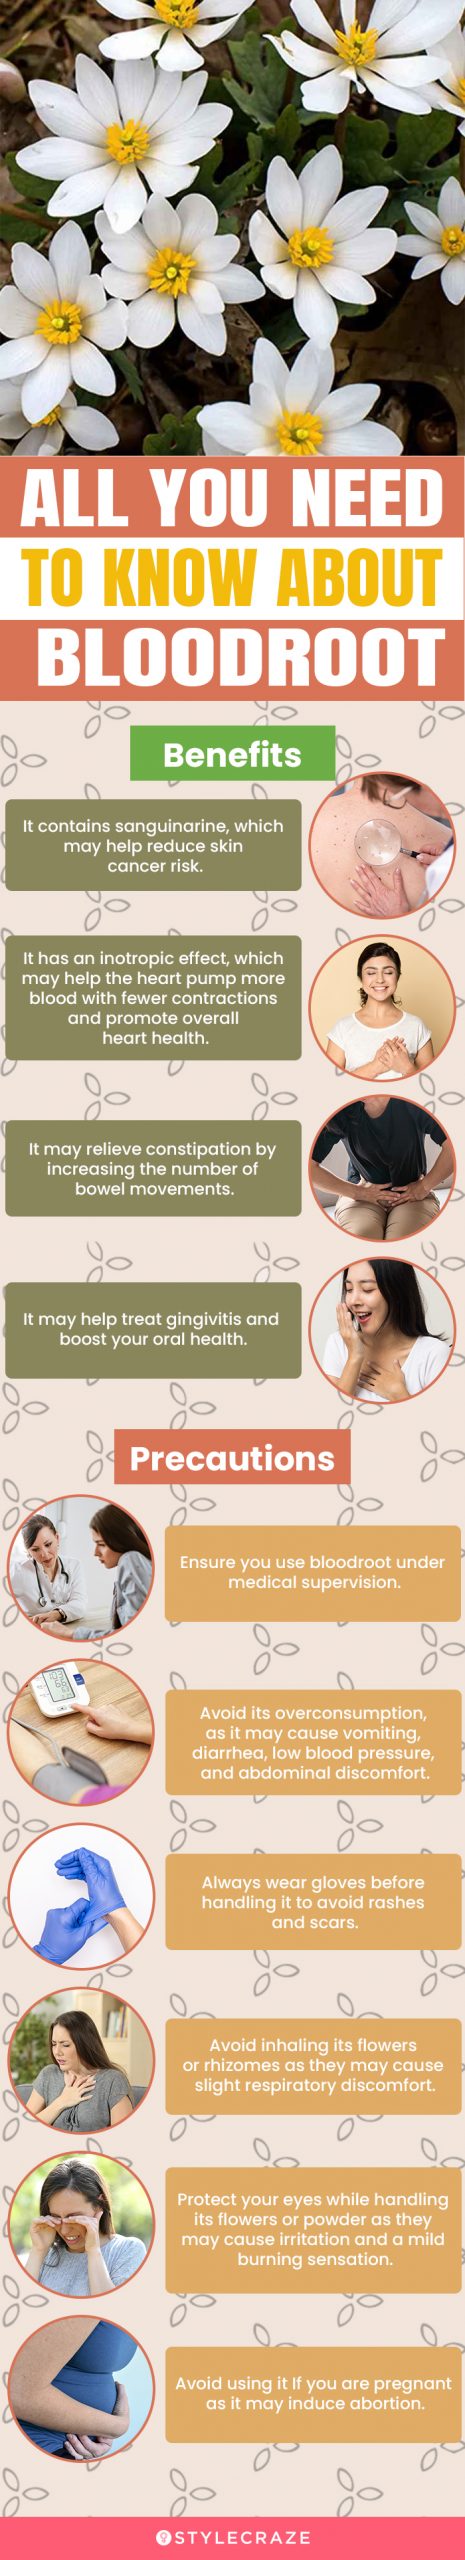 all you need to know about bloodroot (infographic)